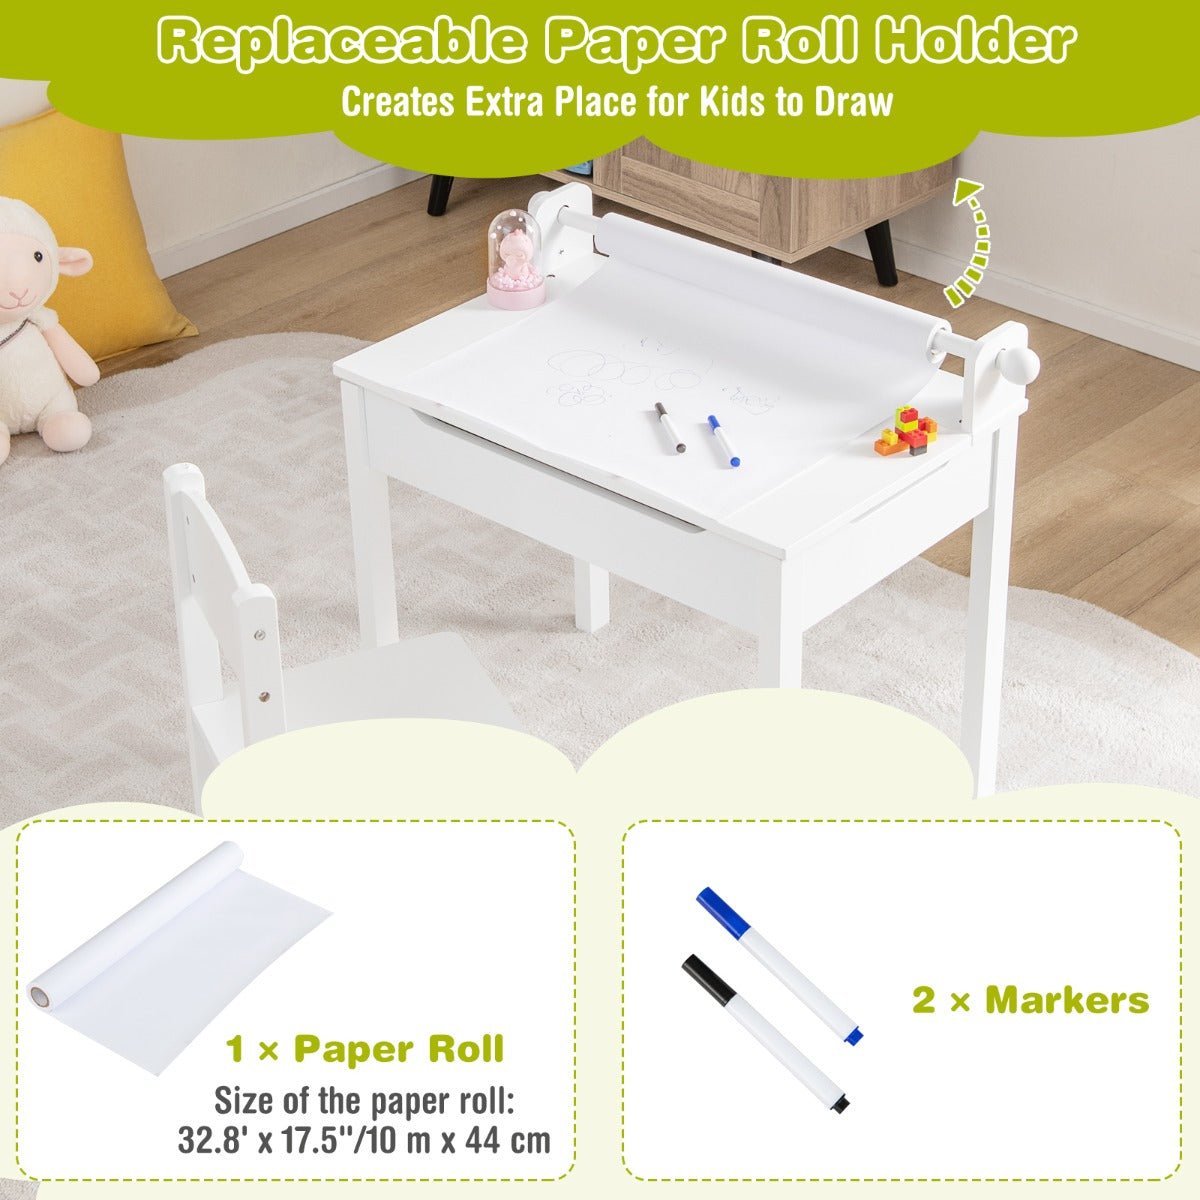 Children's Study Desk & Chair: Paper Roll Holder for Drawing & Studying